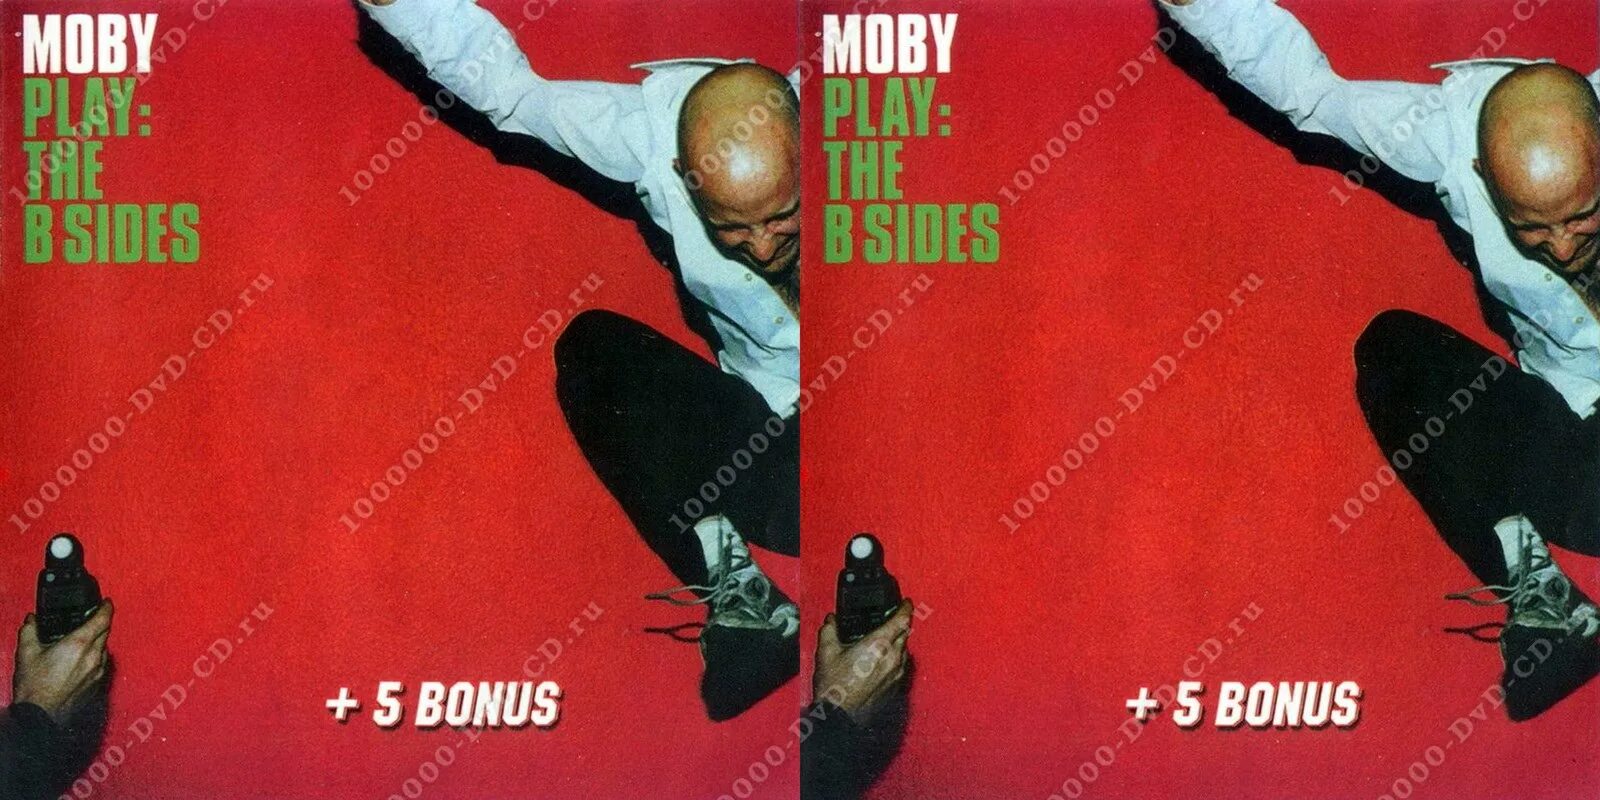 Moby Play 1999. Moby обложка. Moby Play b Sides. Moby album Cover.